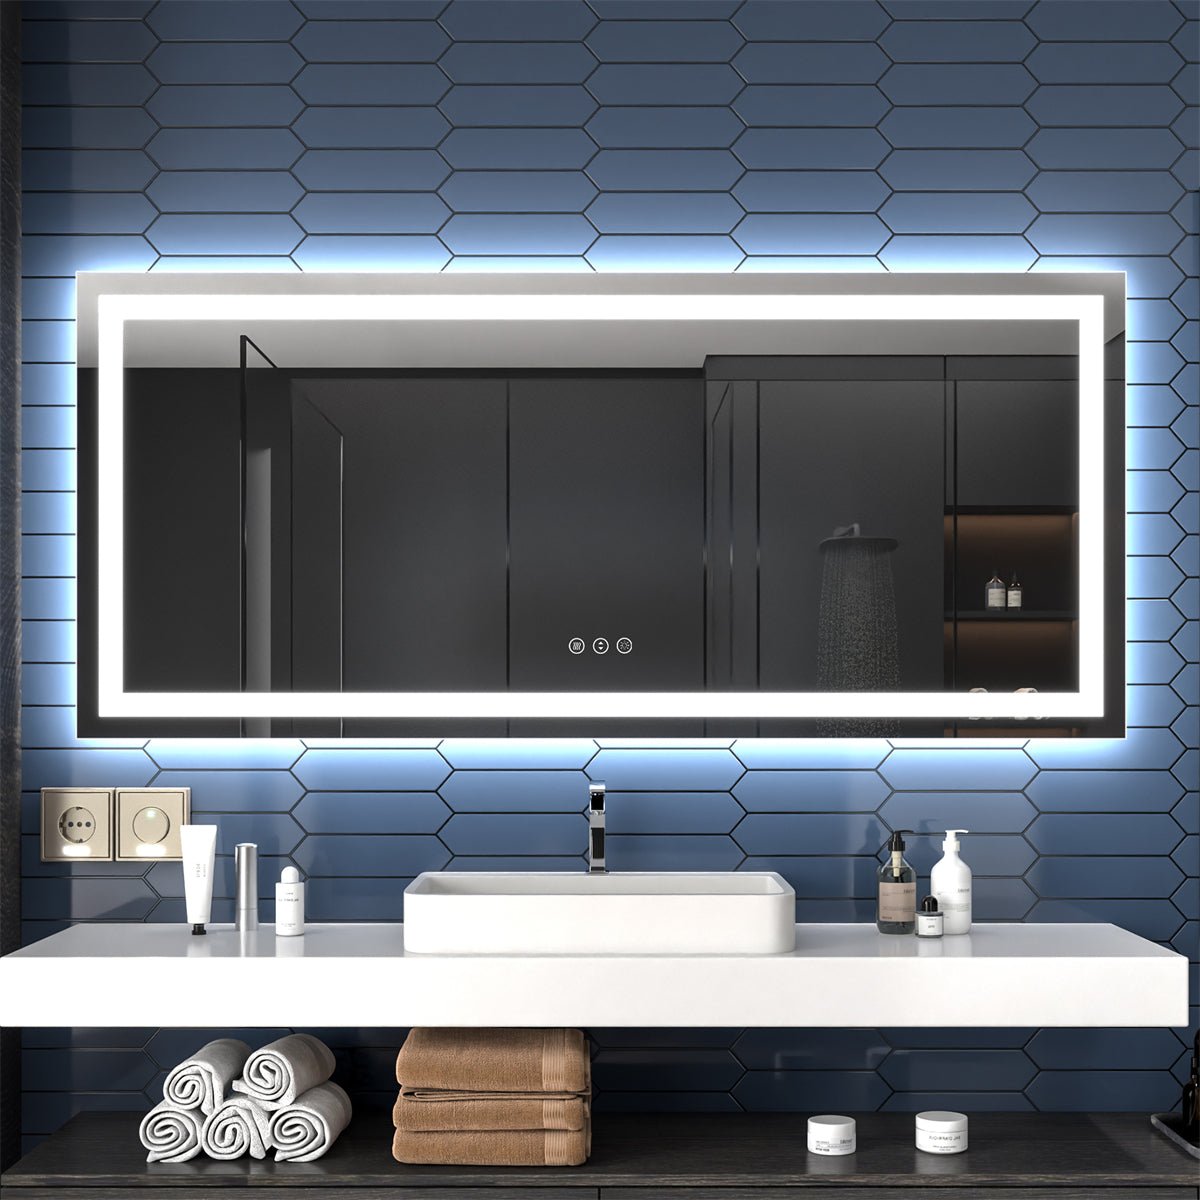 Apex 72" W x 32" H LED Bathroom Large Light Led Mirror,Anti Fog,Dimmable,Dual Lighting Mode,Tempered Glass